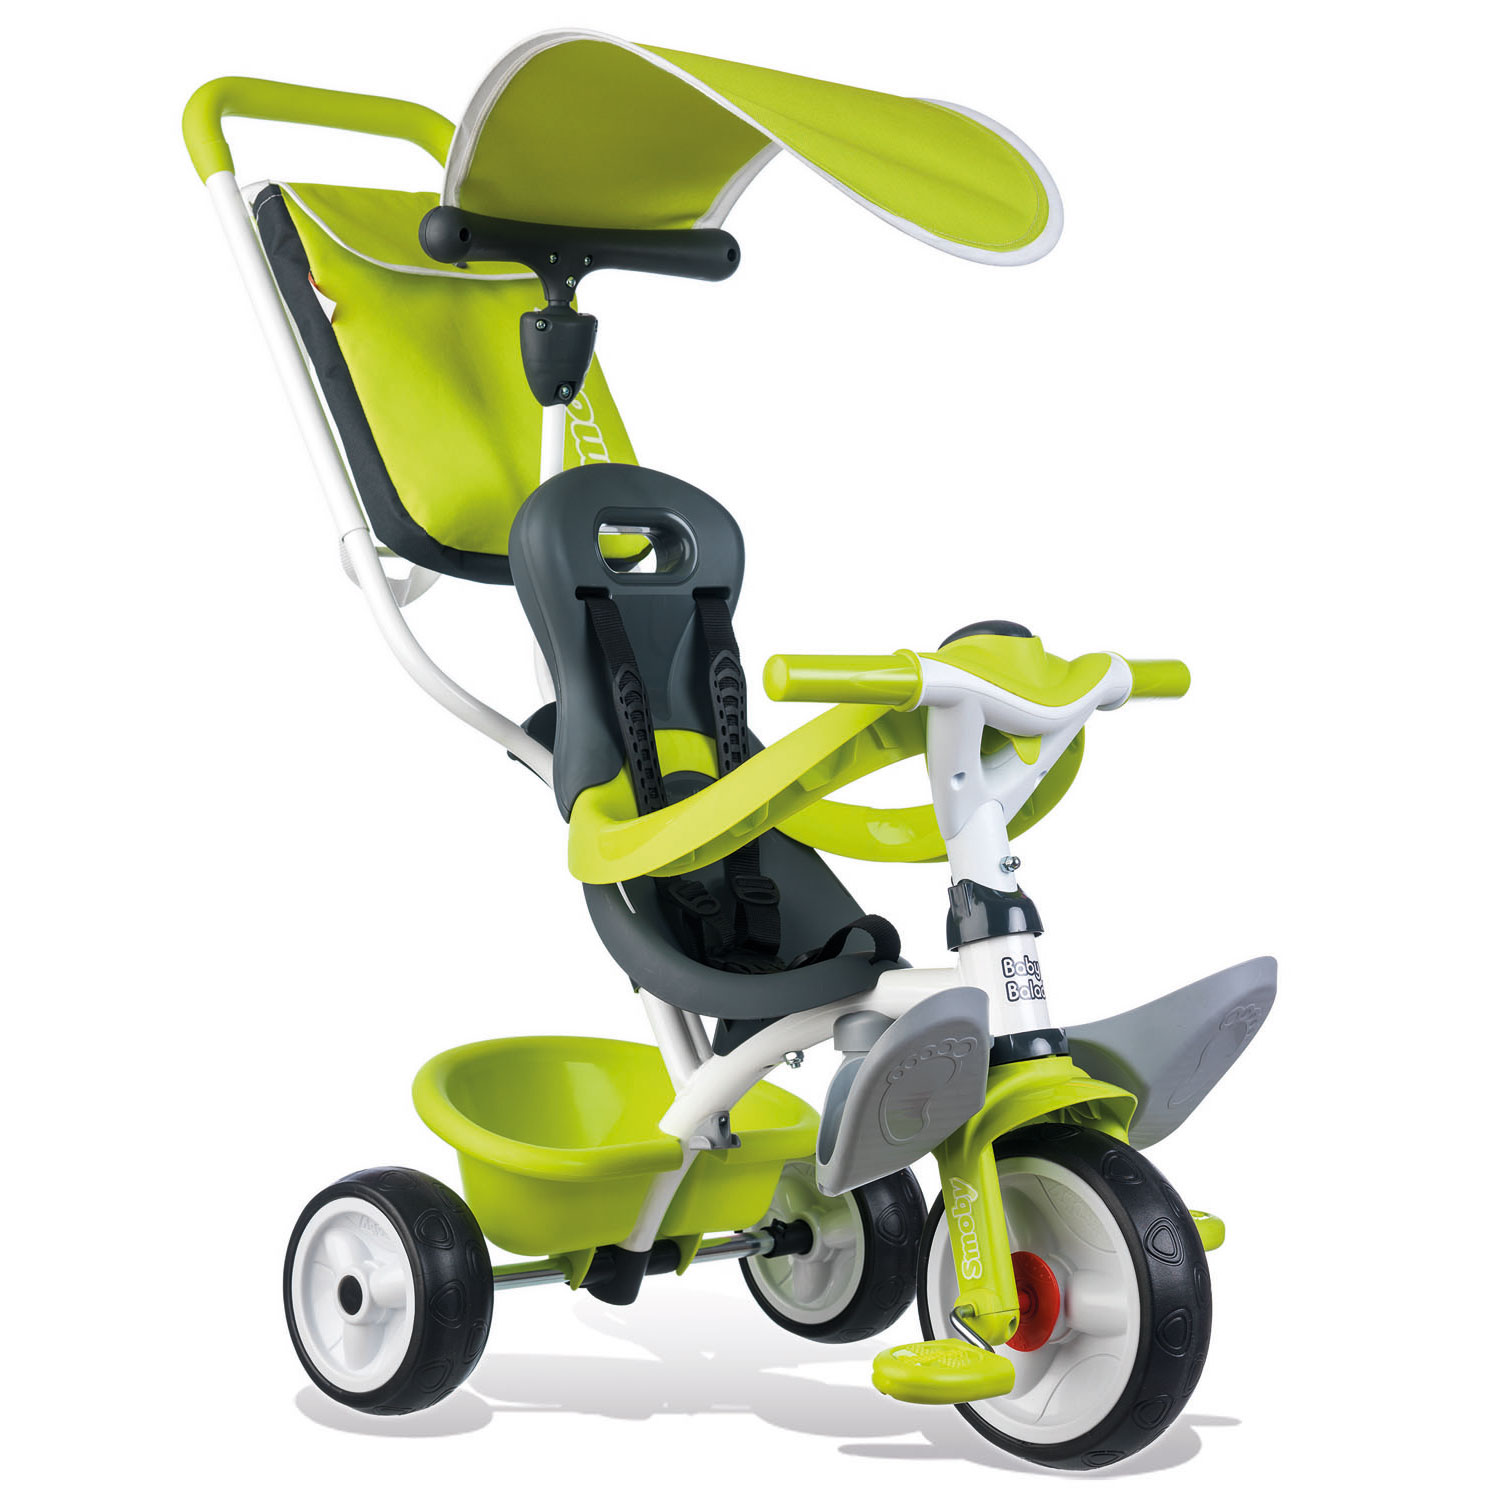 Tricycle baby balade de Smoby 